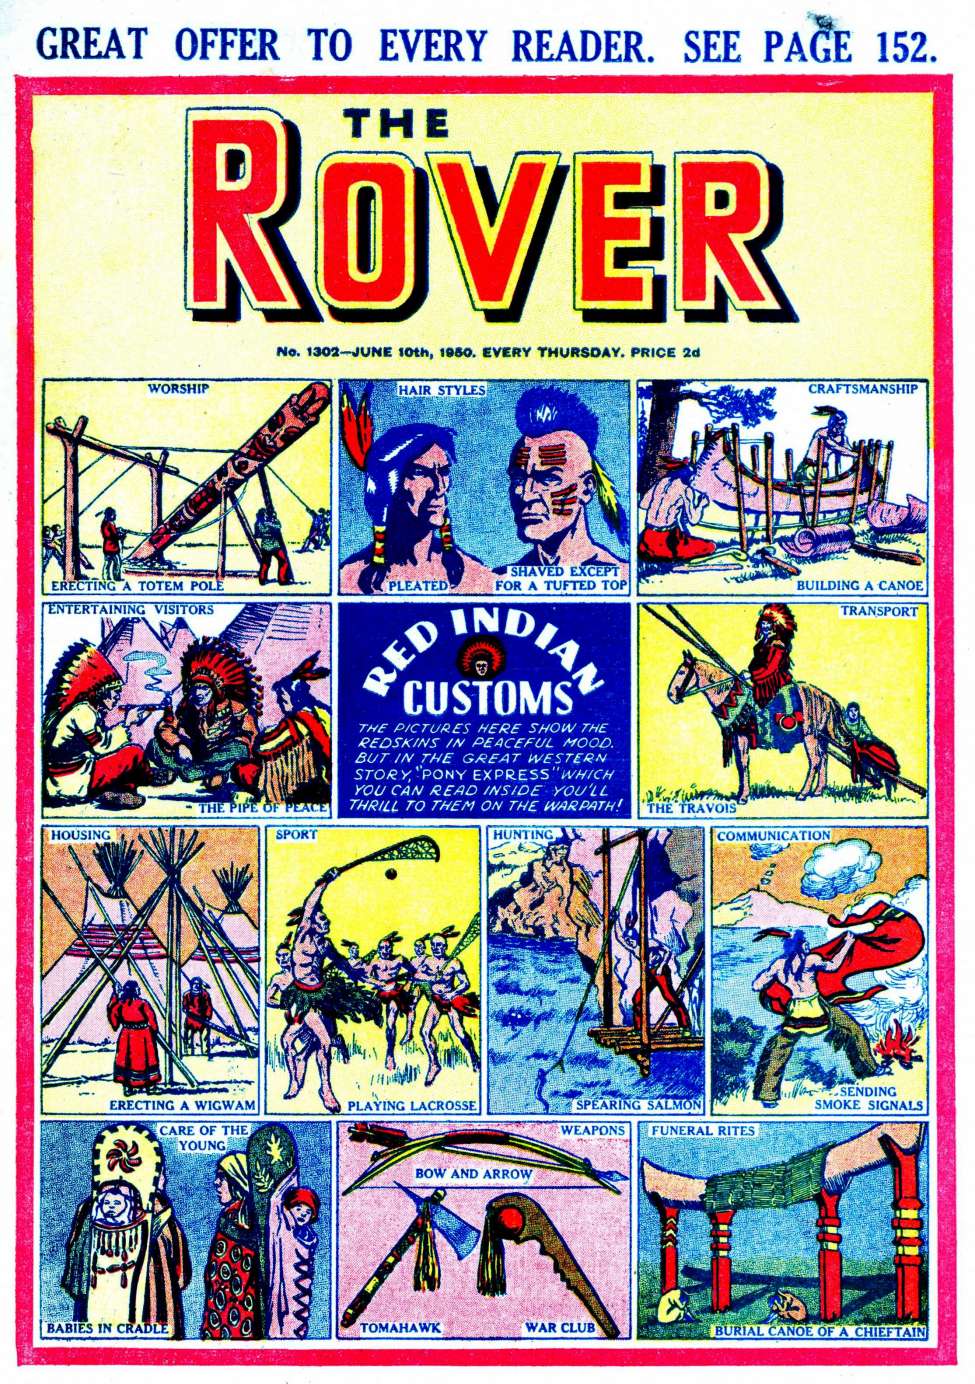 Book Cover For The Rover 1302